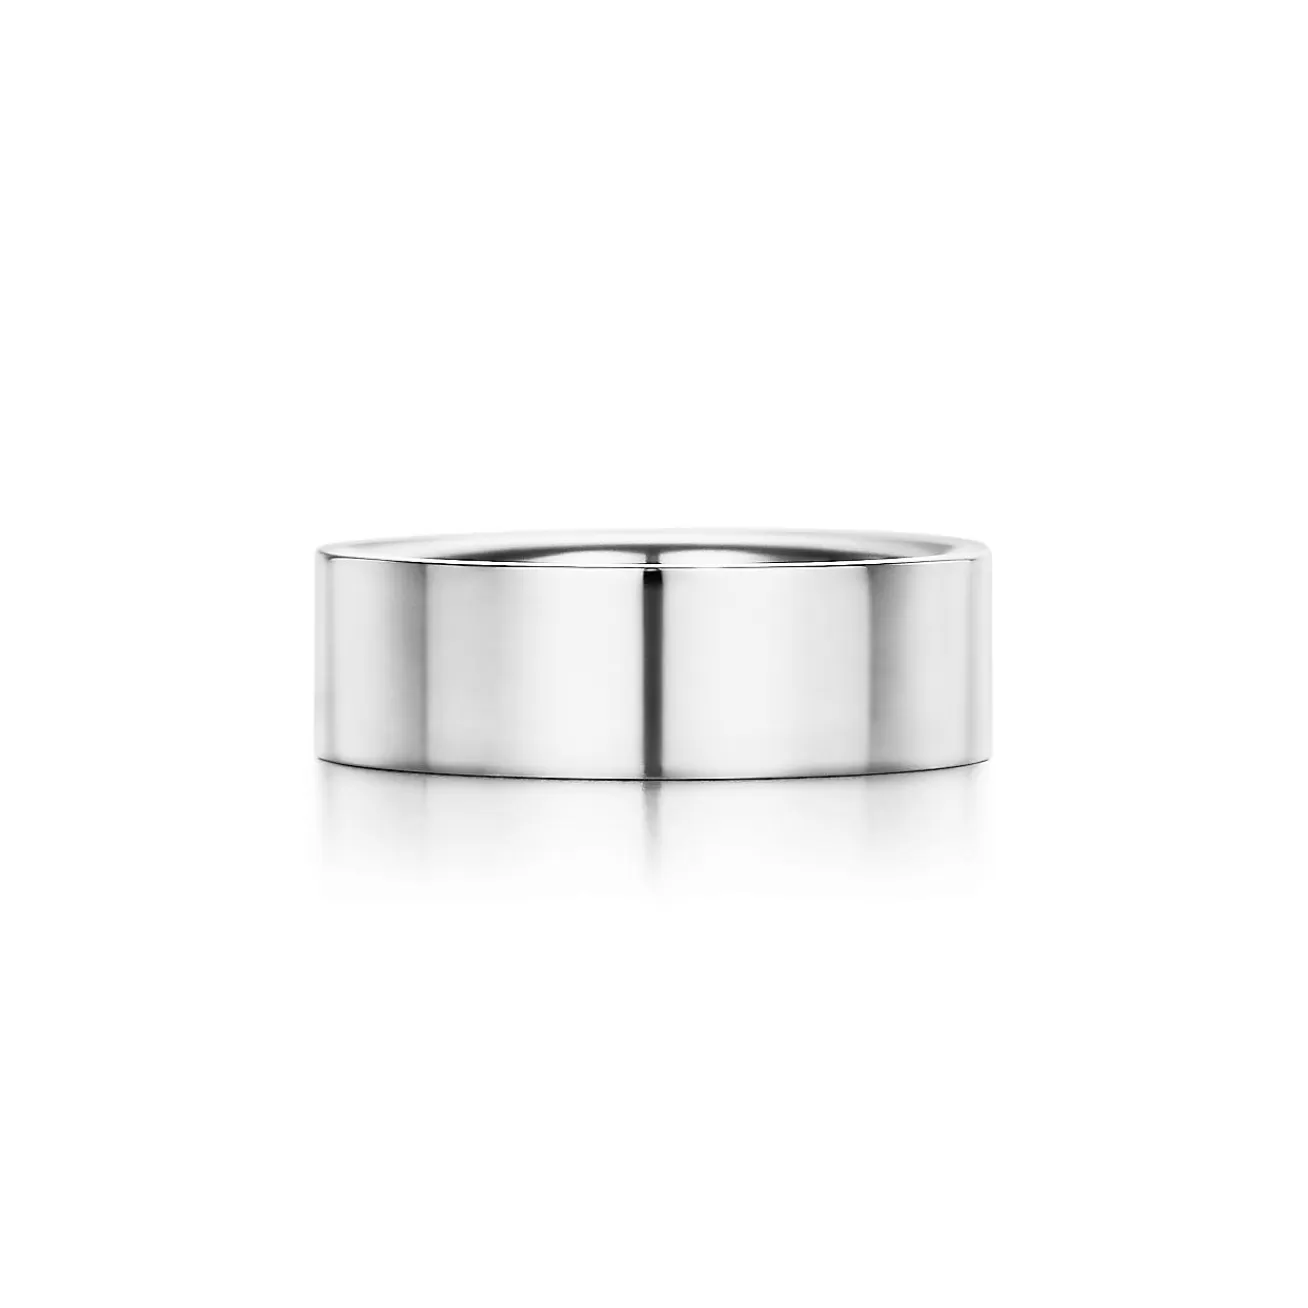 Tiffany & Co. Tiffany Essential Band ring in platinum, 6 mm wide. | ^ Rings | Men's Jewelry